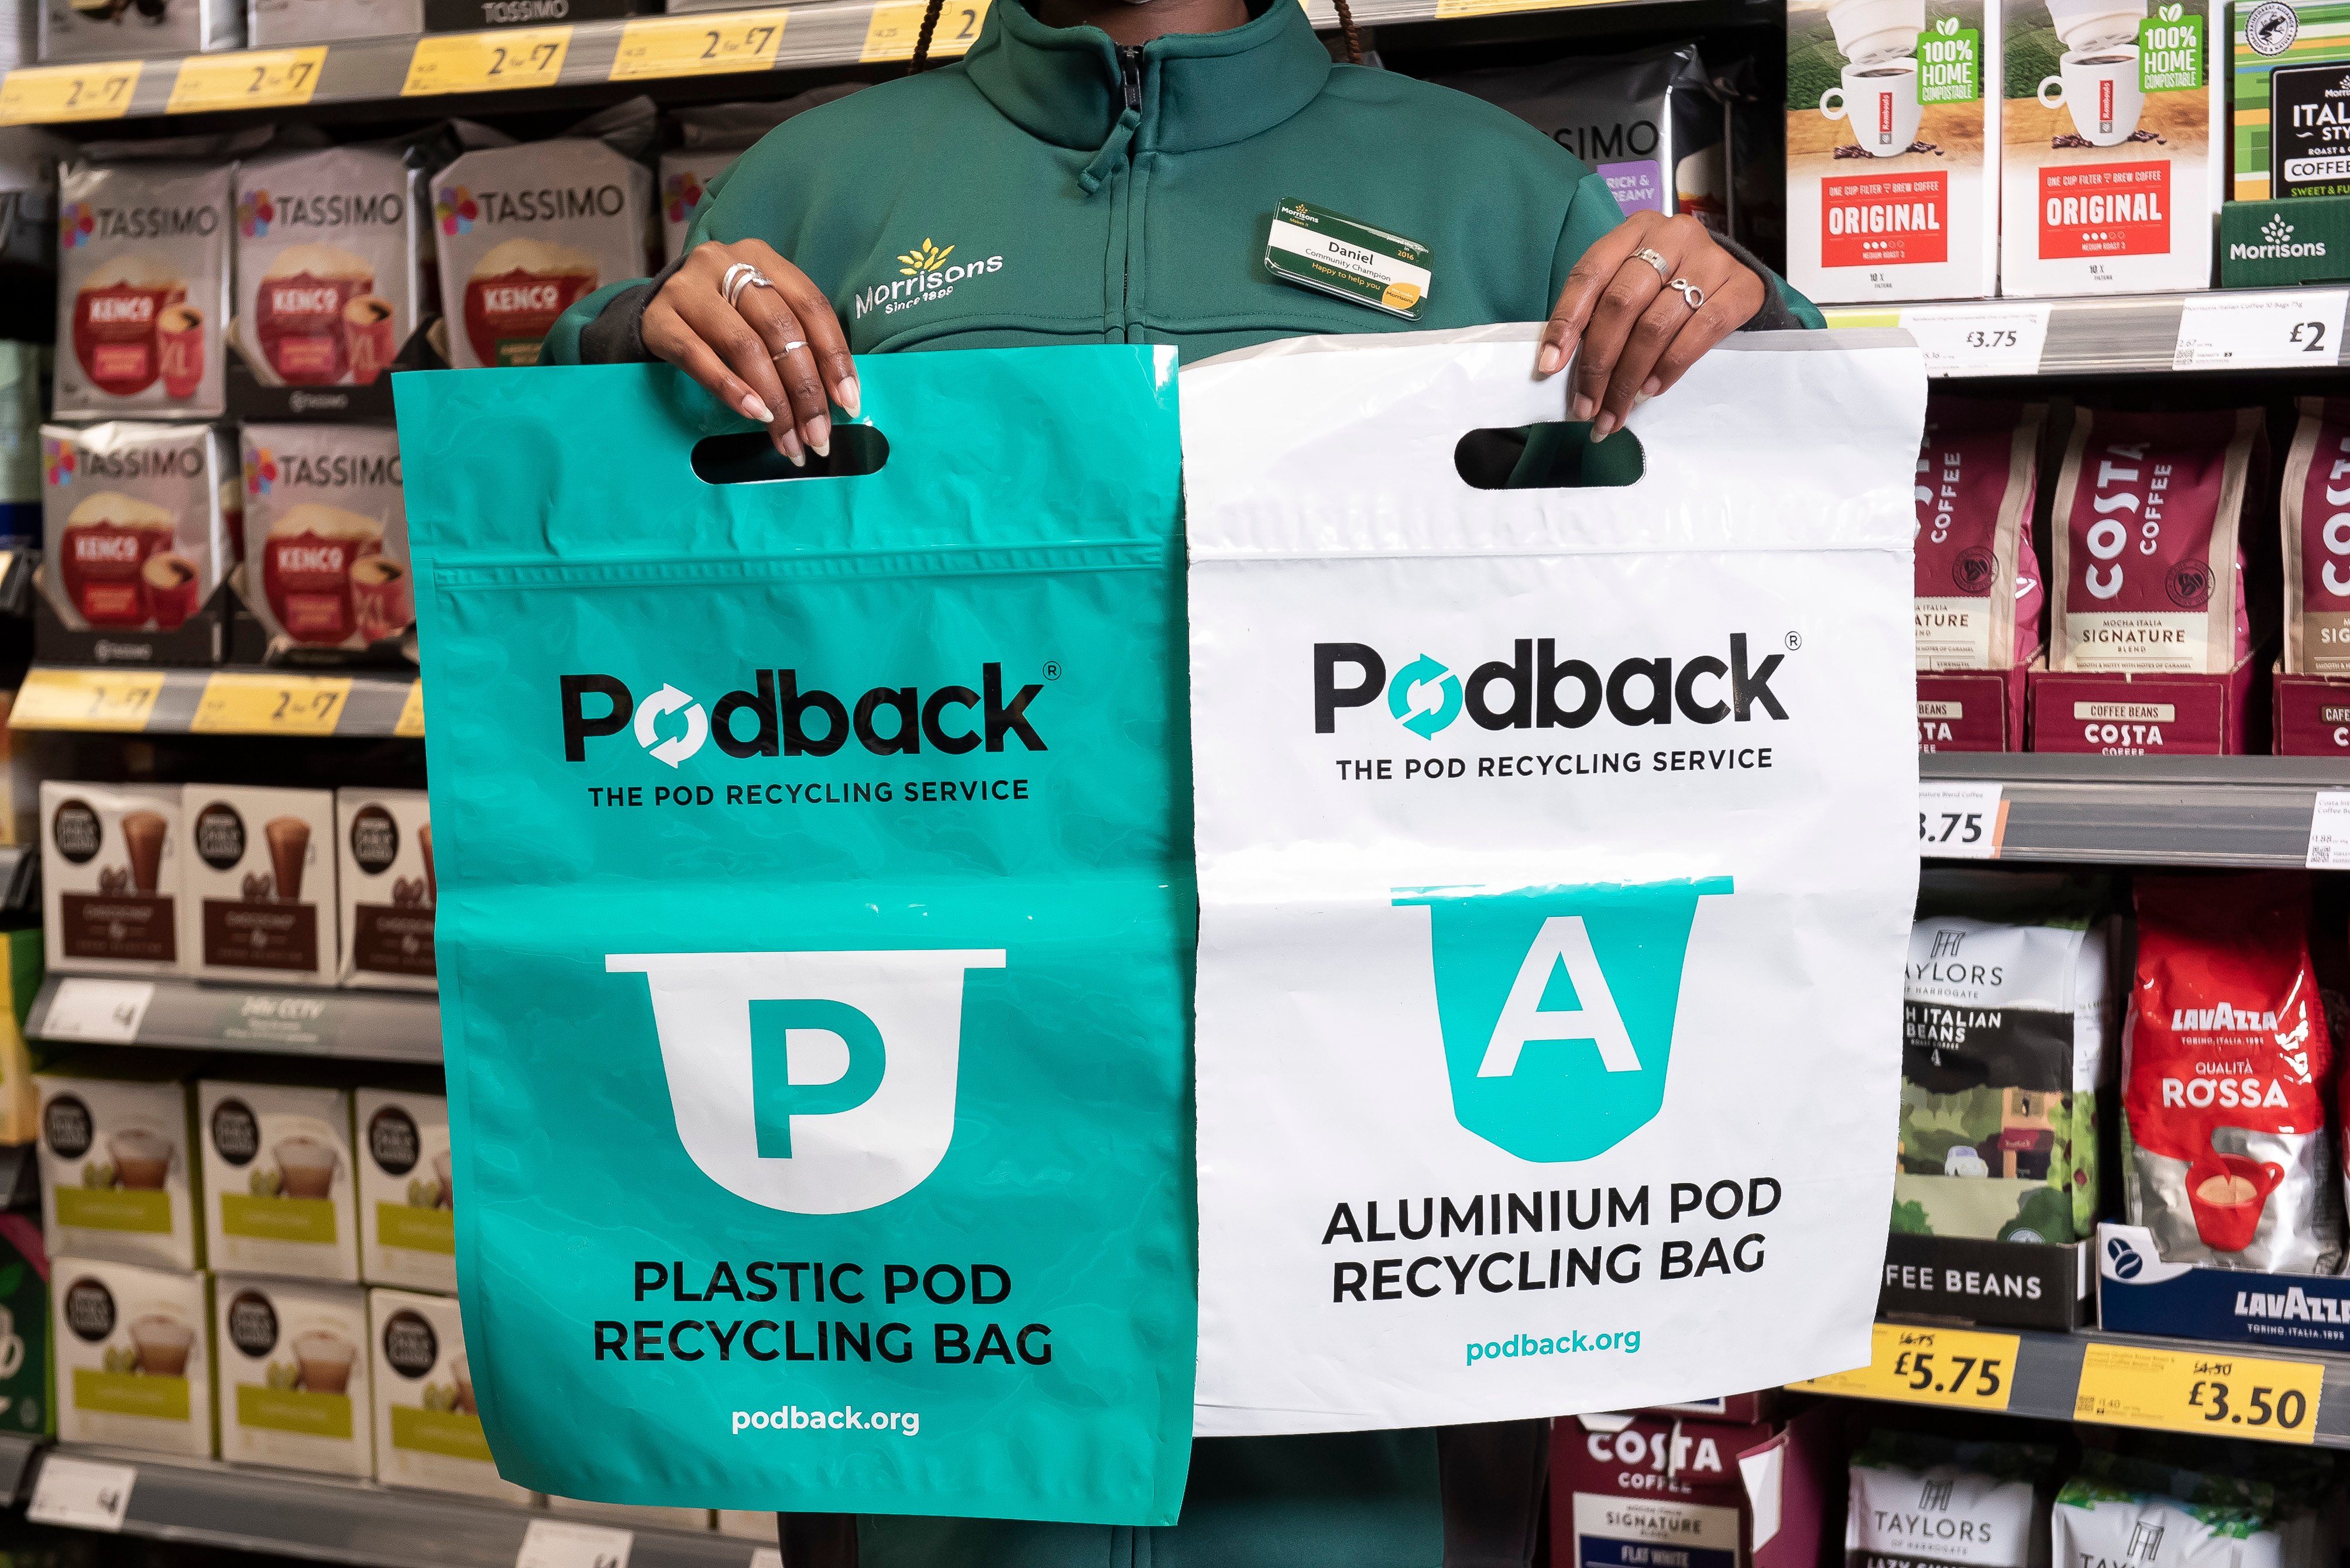 Morrisons becomes first supermarket to partner with coffee pod recycling scheme 'Podback'